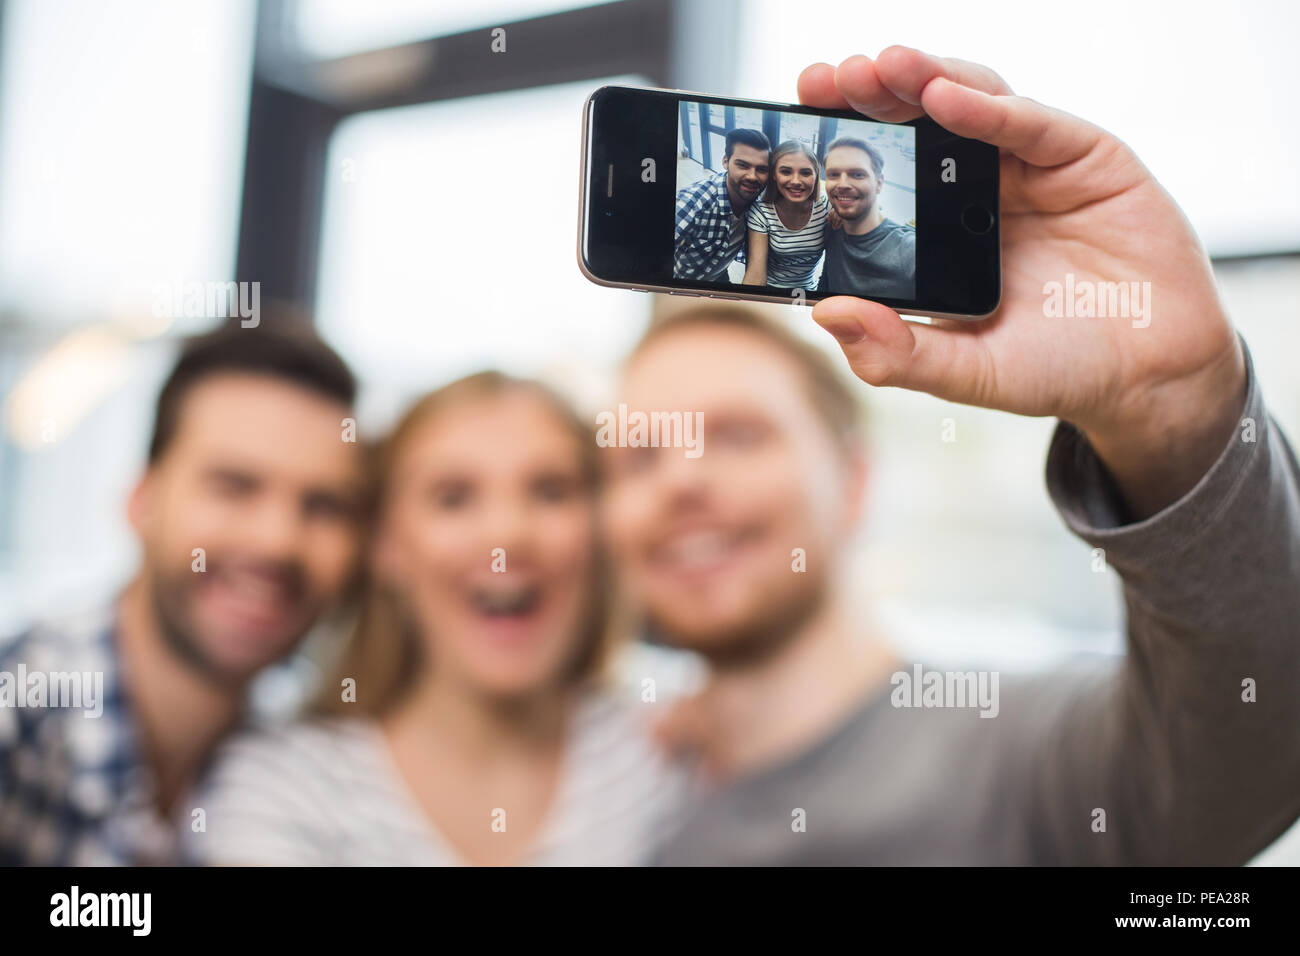 Good friend. Selective focus of a smartphone with a photo of joyful nice happy friends on the screen Stock Photo